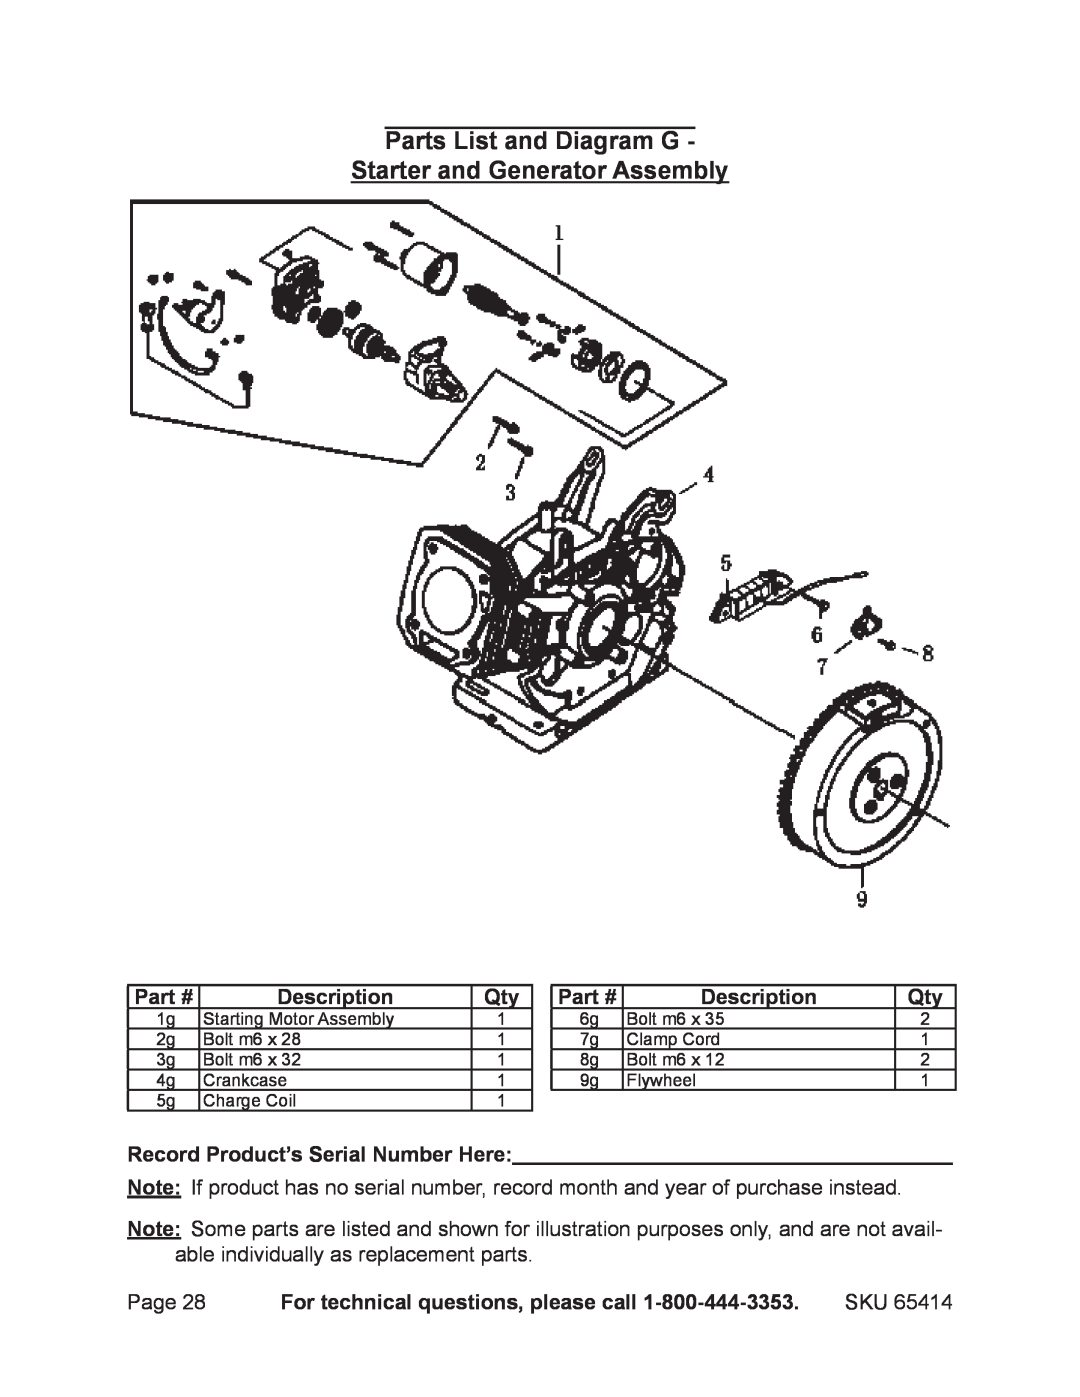 Chicago Electric 65414 manual Parts List and Diagram G Starter and Generator Assembly, Description 